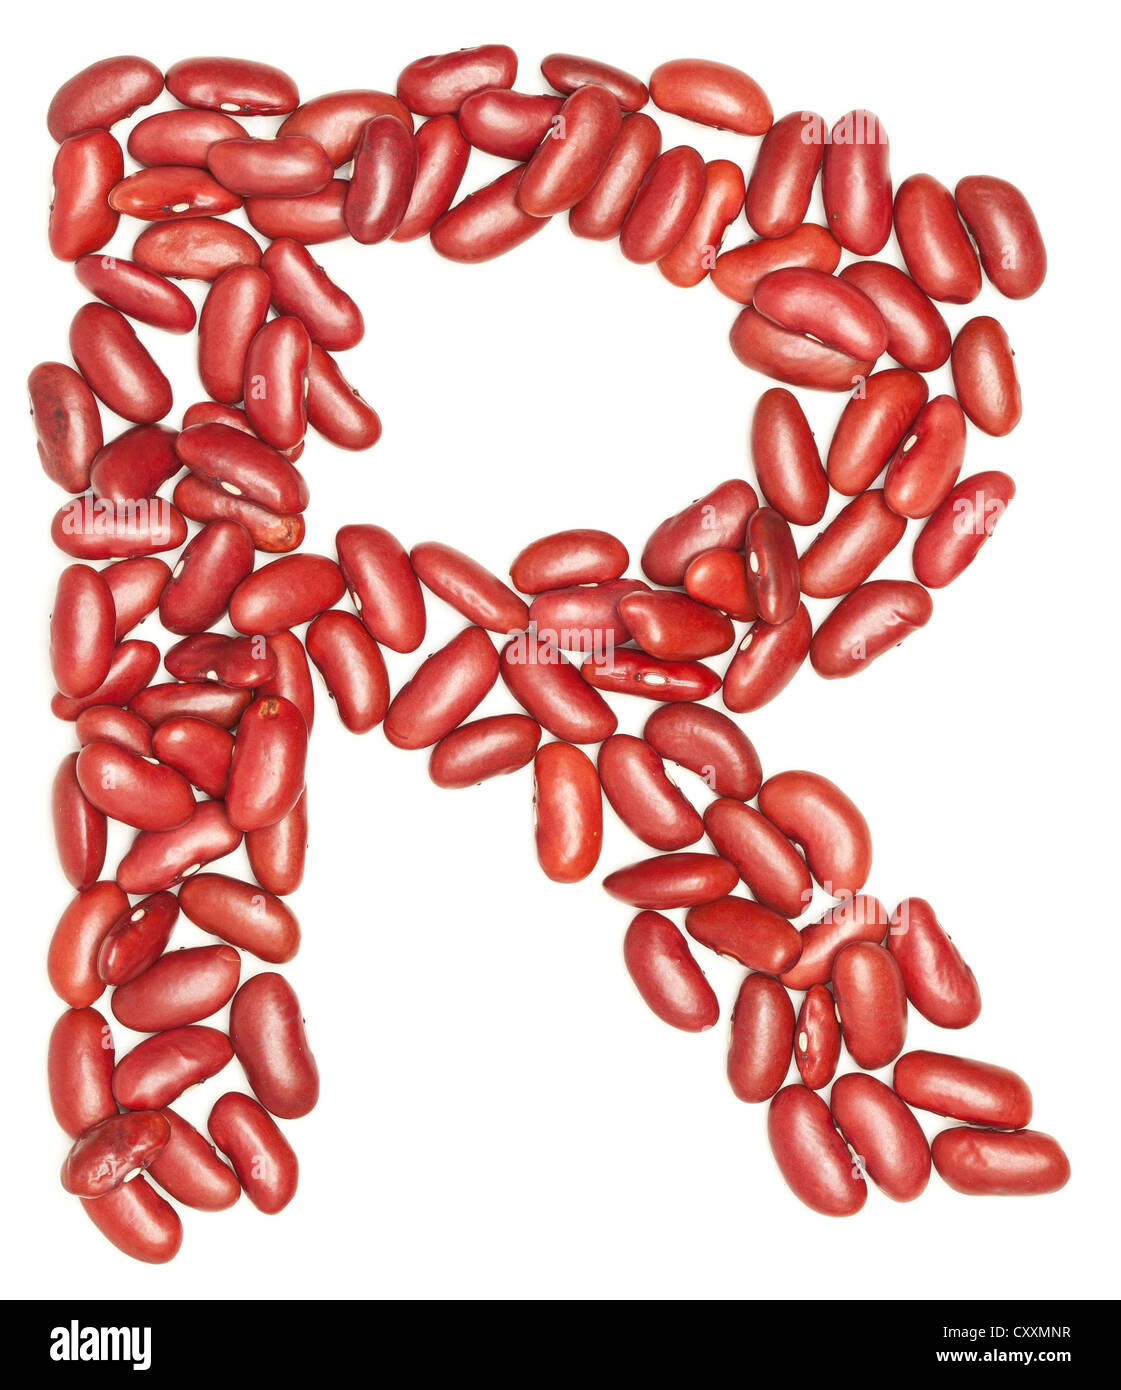 R, Alphabet from red beans. on white. Stock Photo